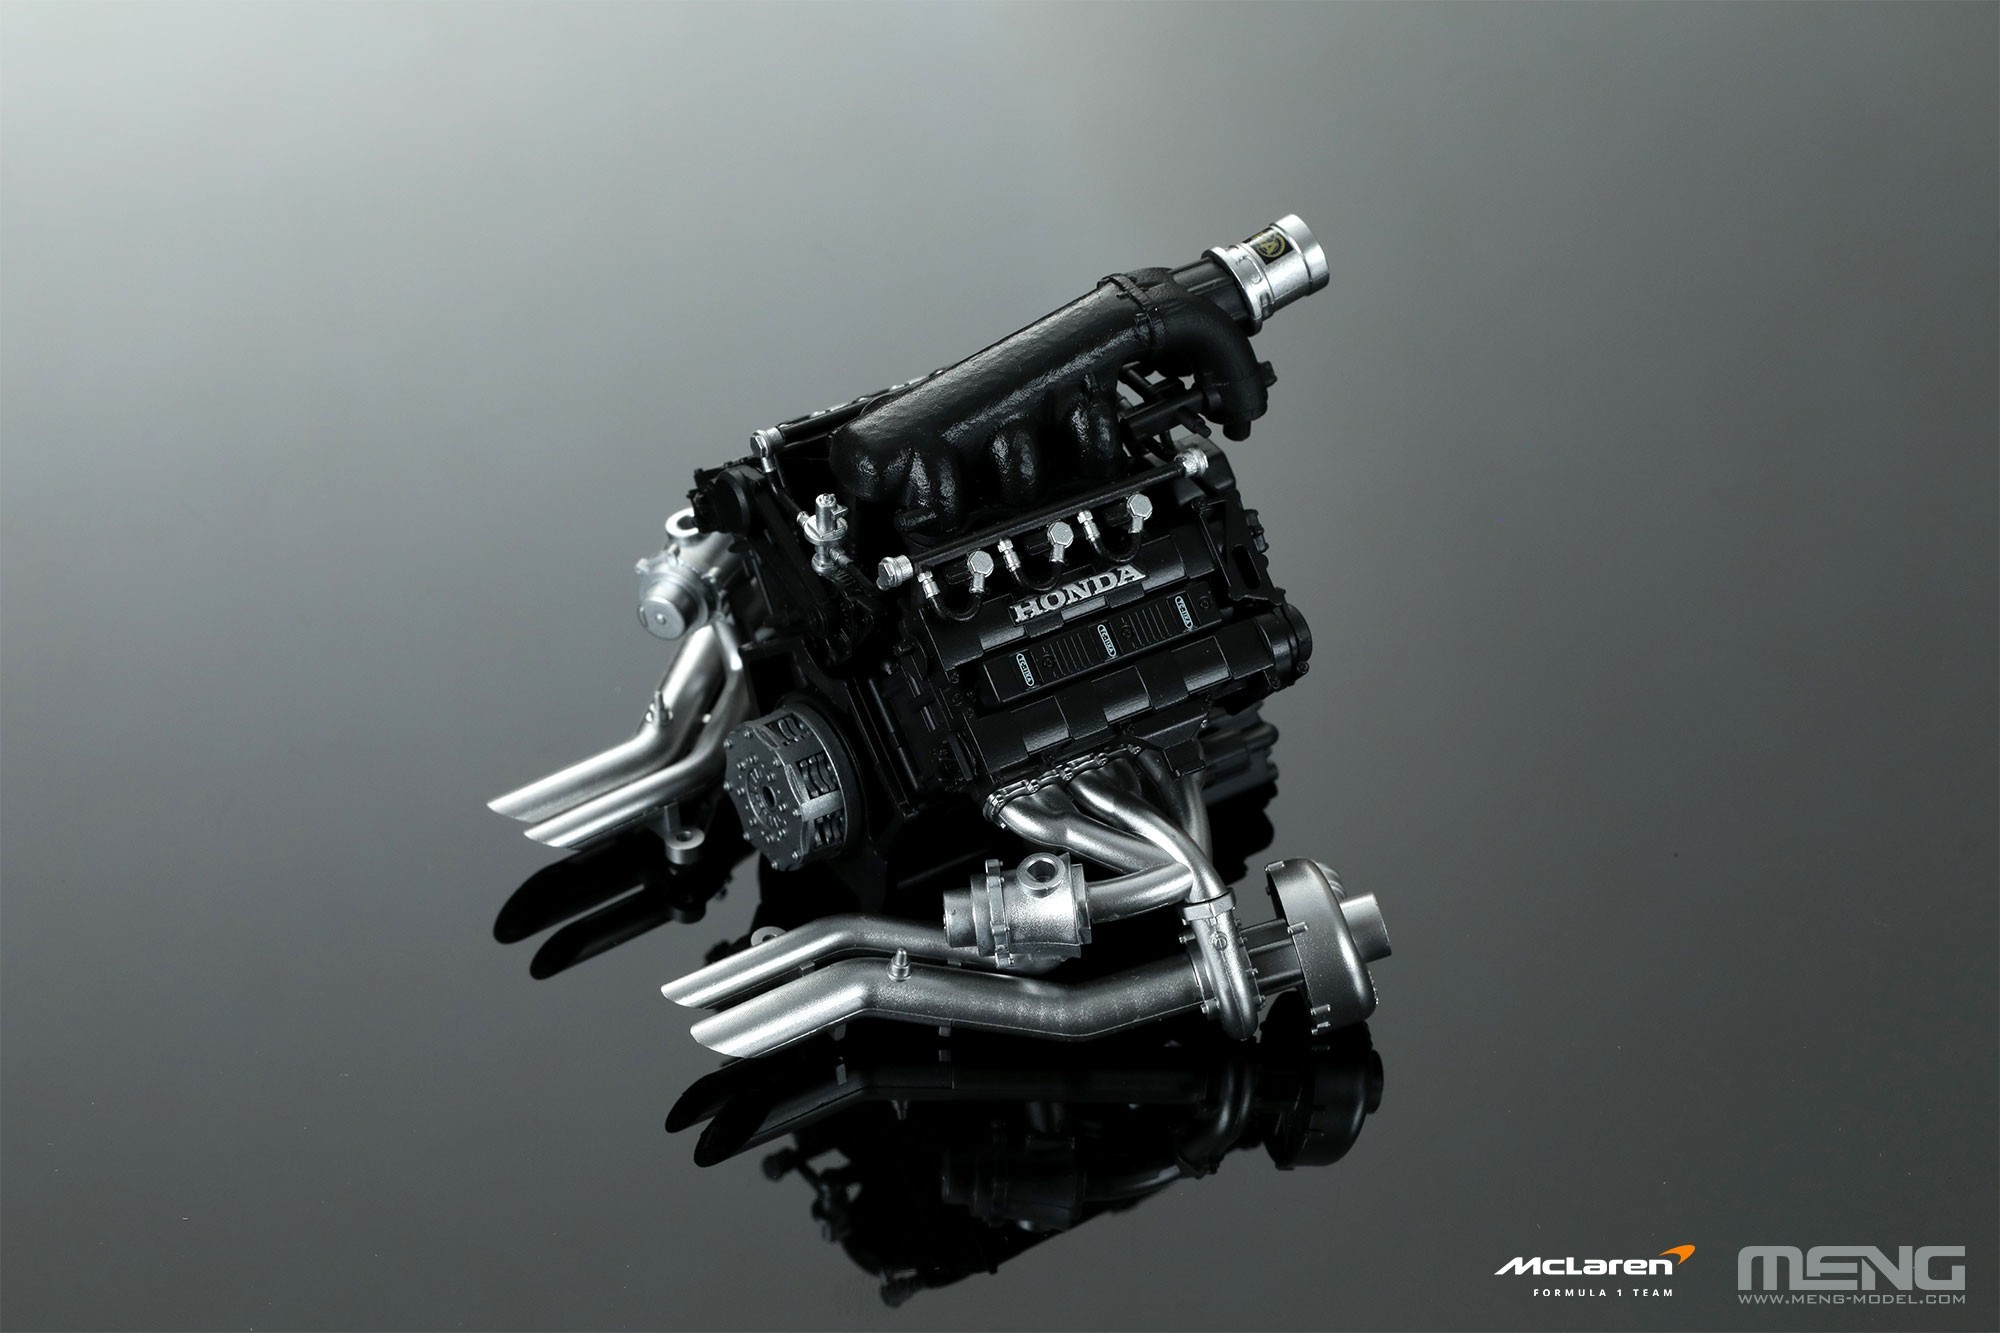 The RA168E 1.5L V6 turbocharged engine is realistically replicated with finely painted parts.